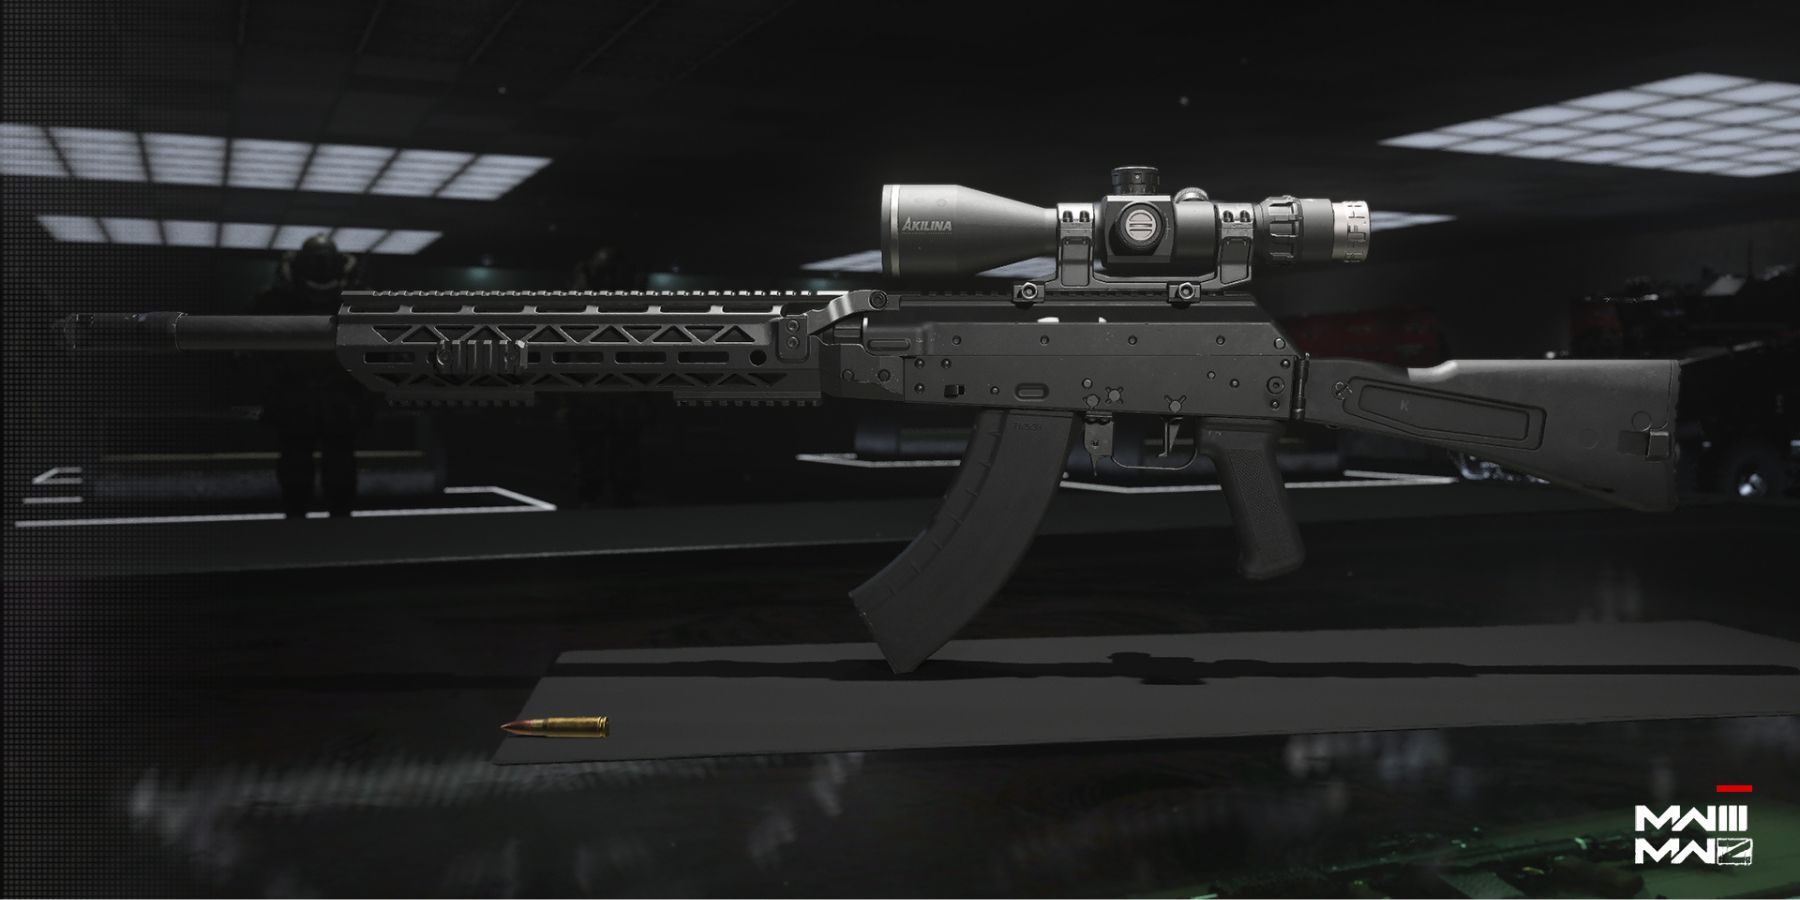 the new sniper rifle in mw3 called the longbow.